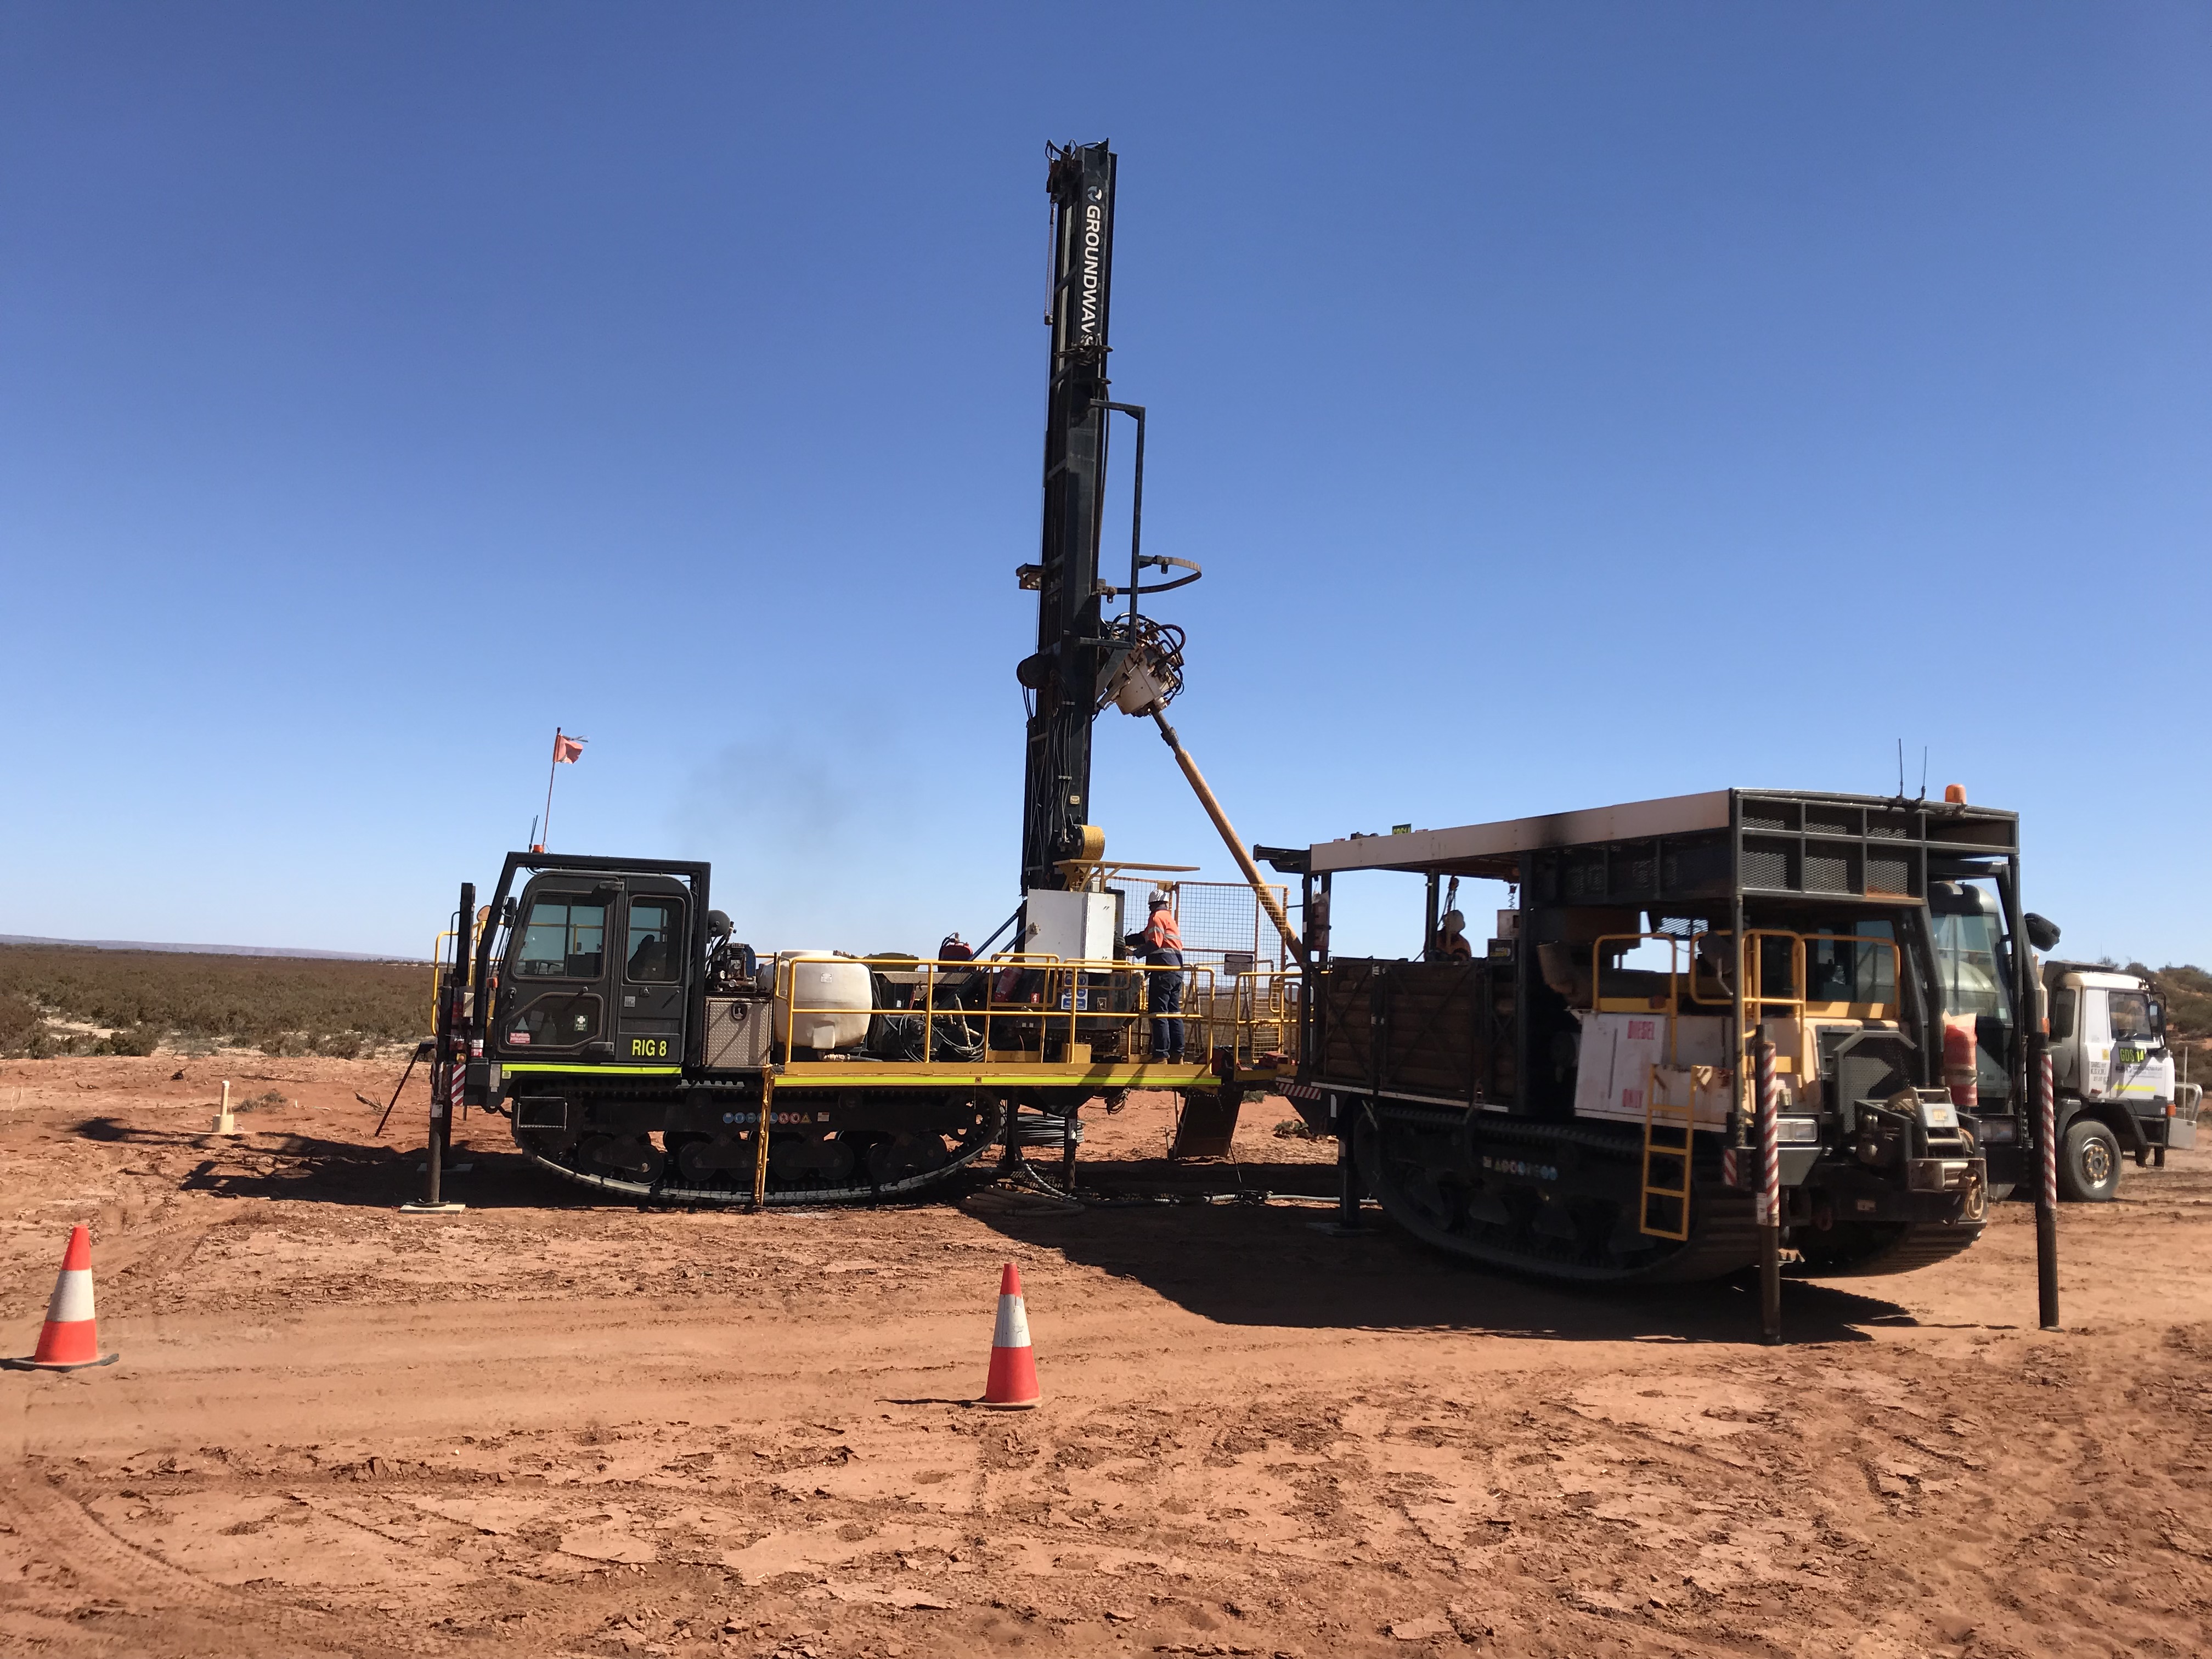 Drill Rig and support vehicles in the desert